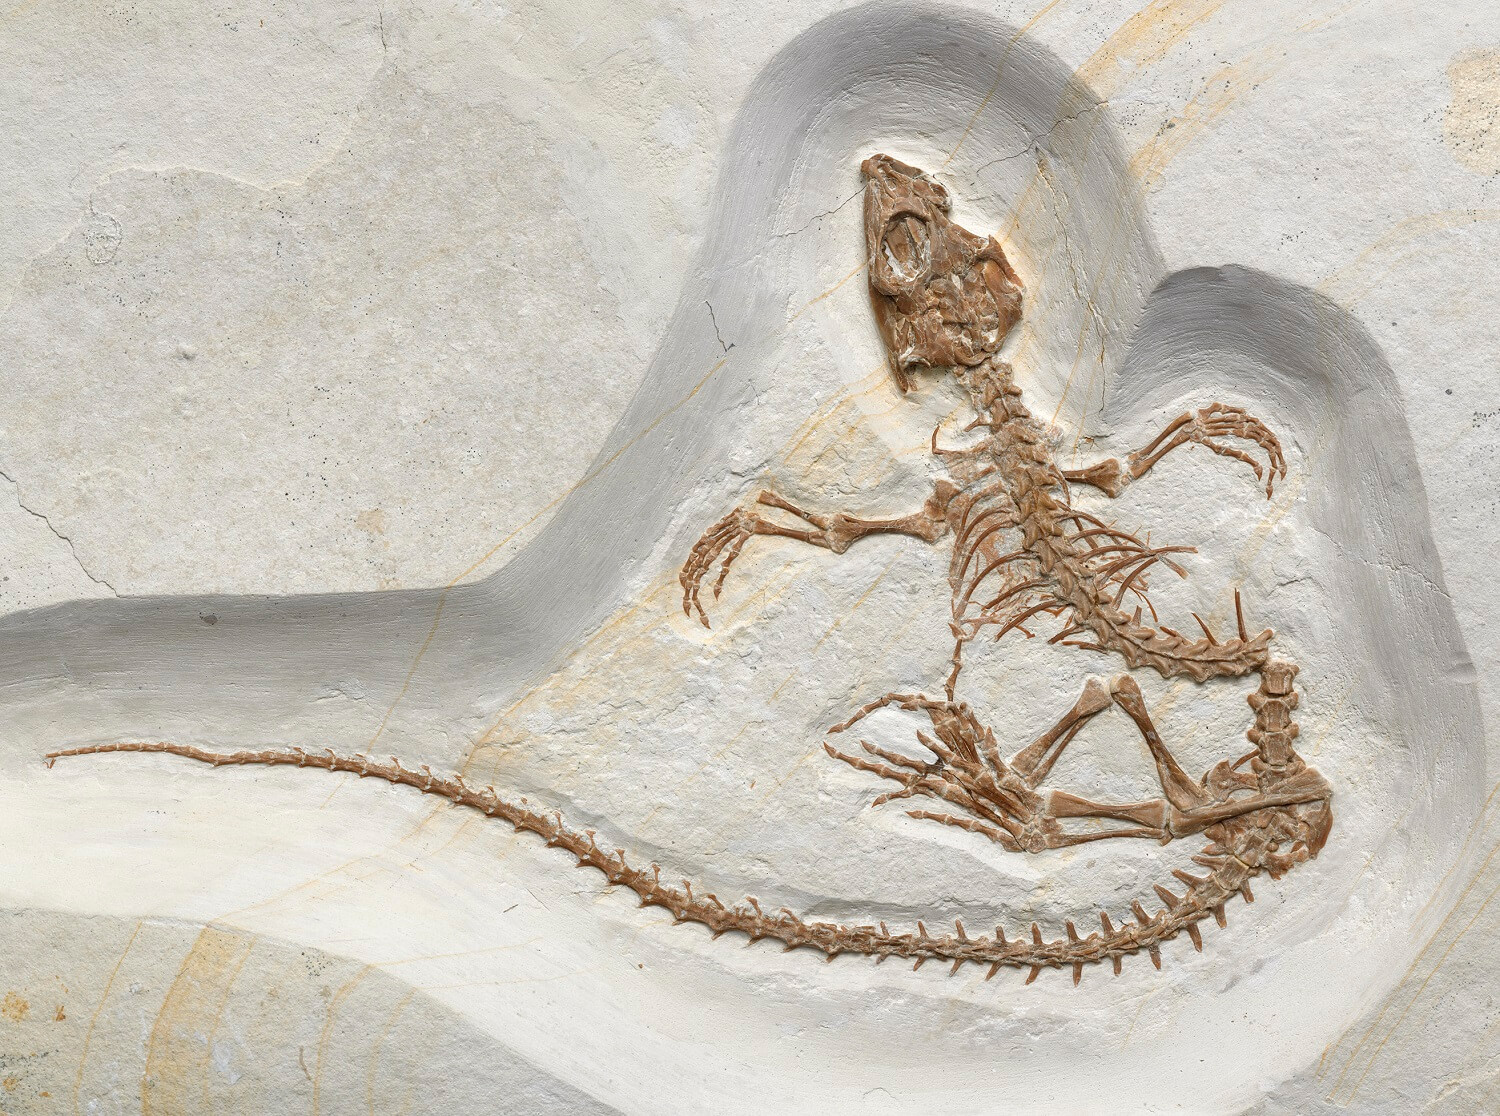 Evolutionary Biologists Say Recently Discovered Fossil Shows Transition of  a Reptile From Life on Land to Life in the Sea - 12/06/2017